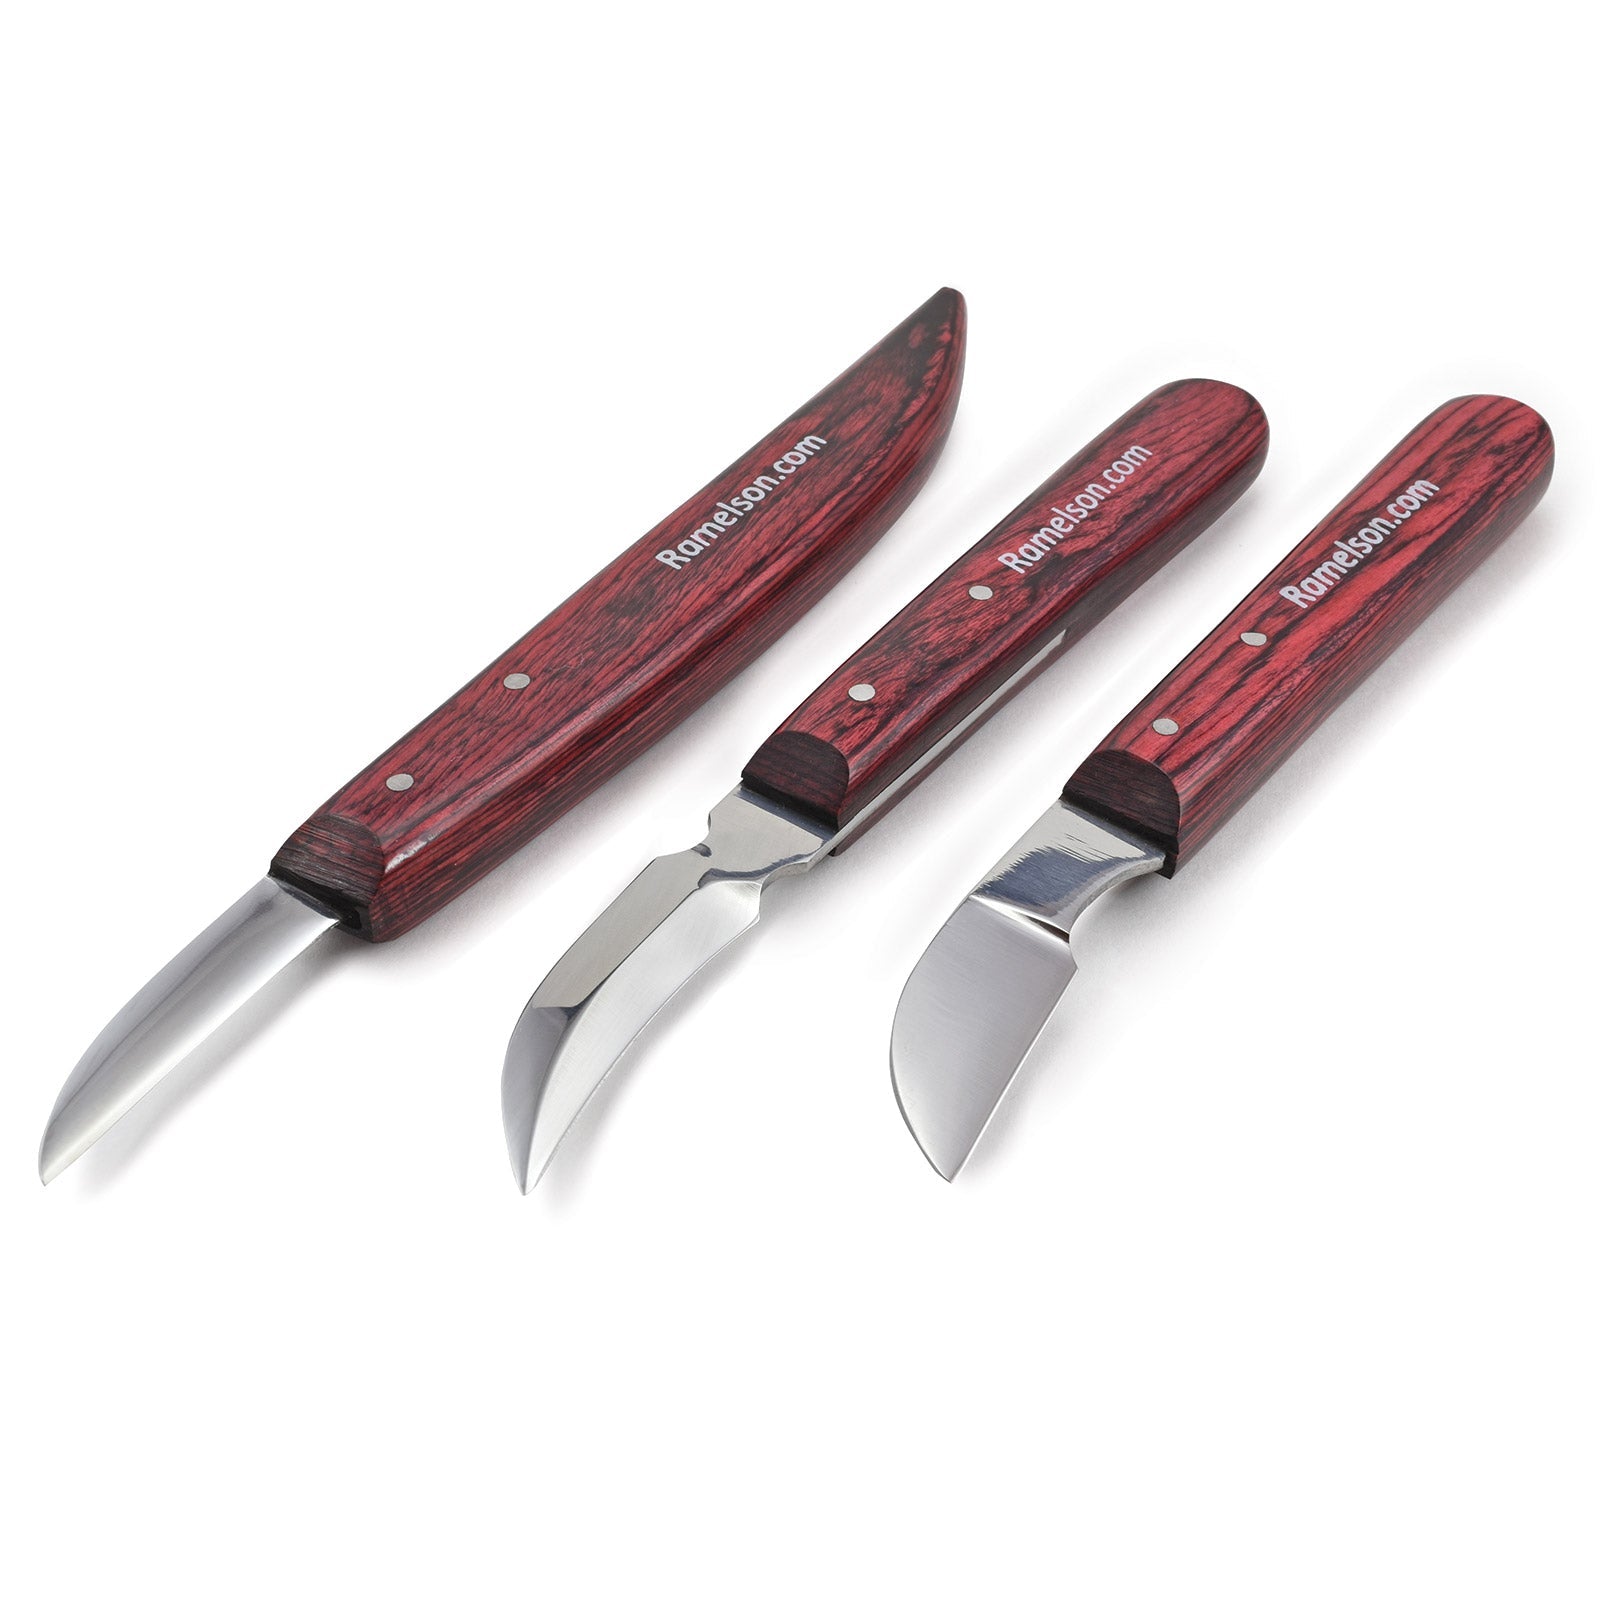 3 - piece Roughing Whittling and Chip Wood Carving Knife Set